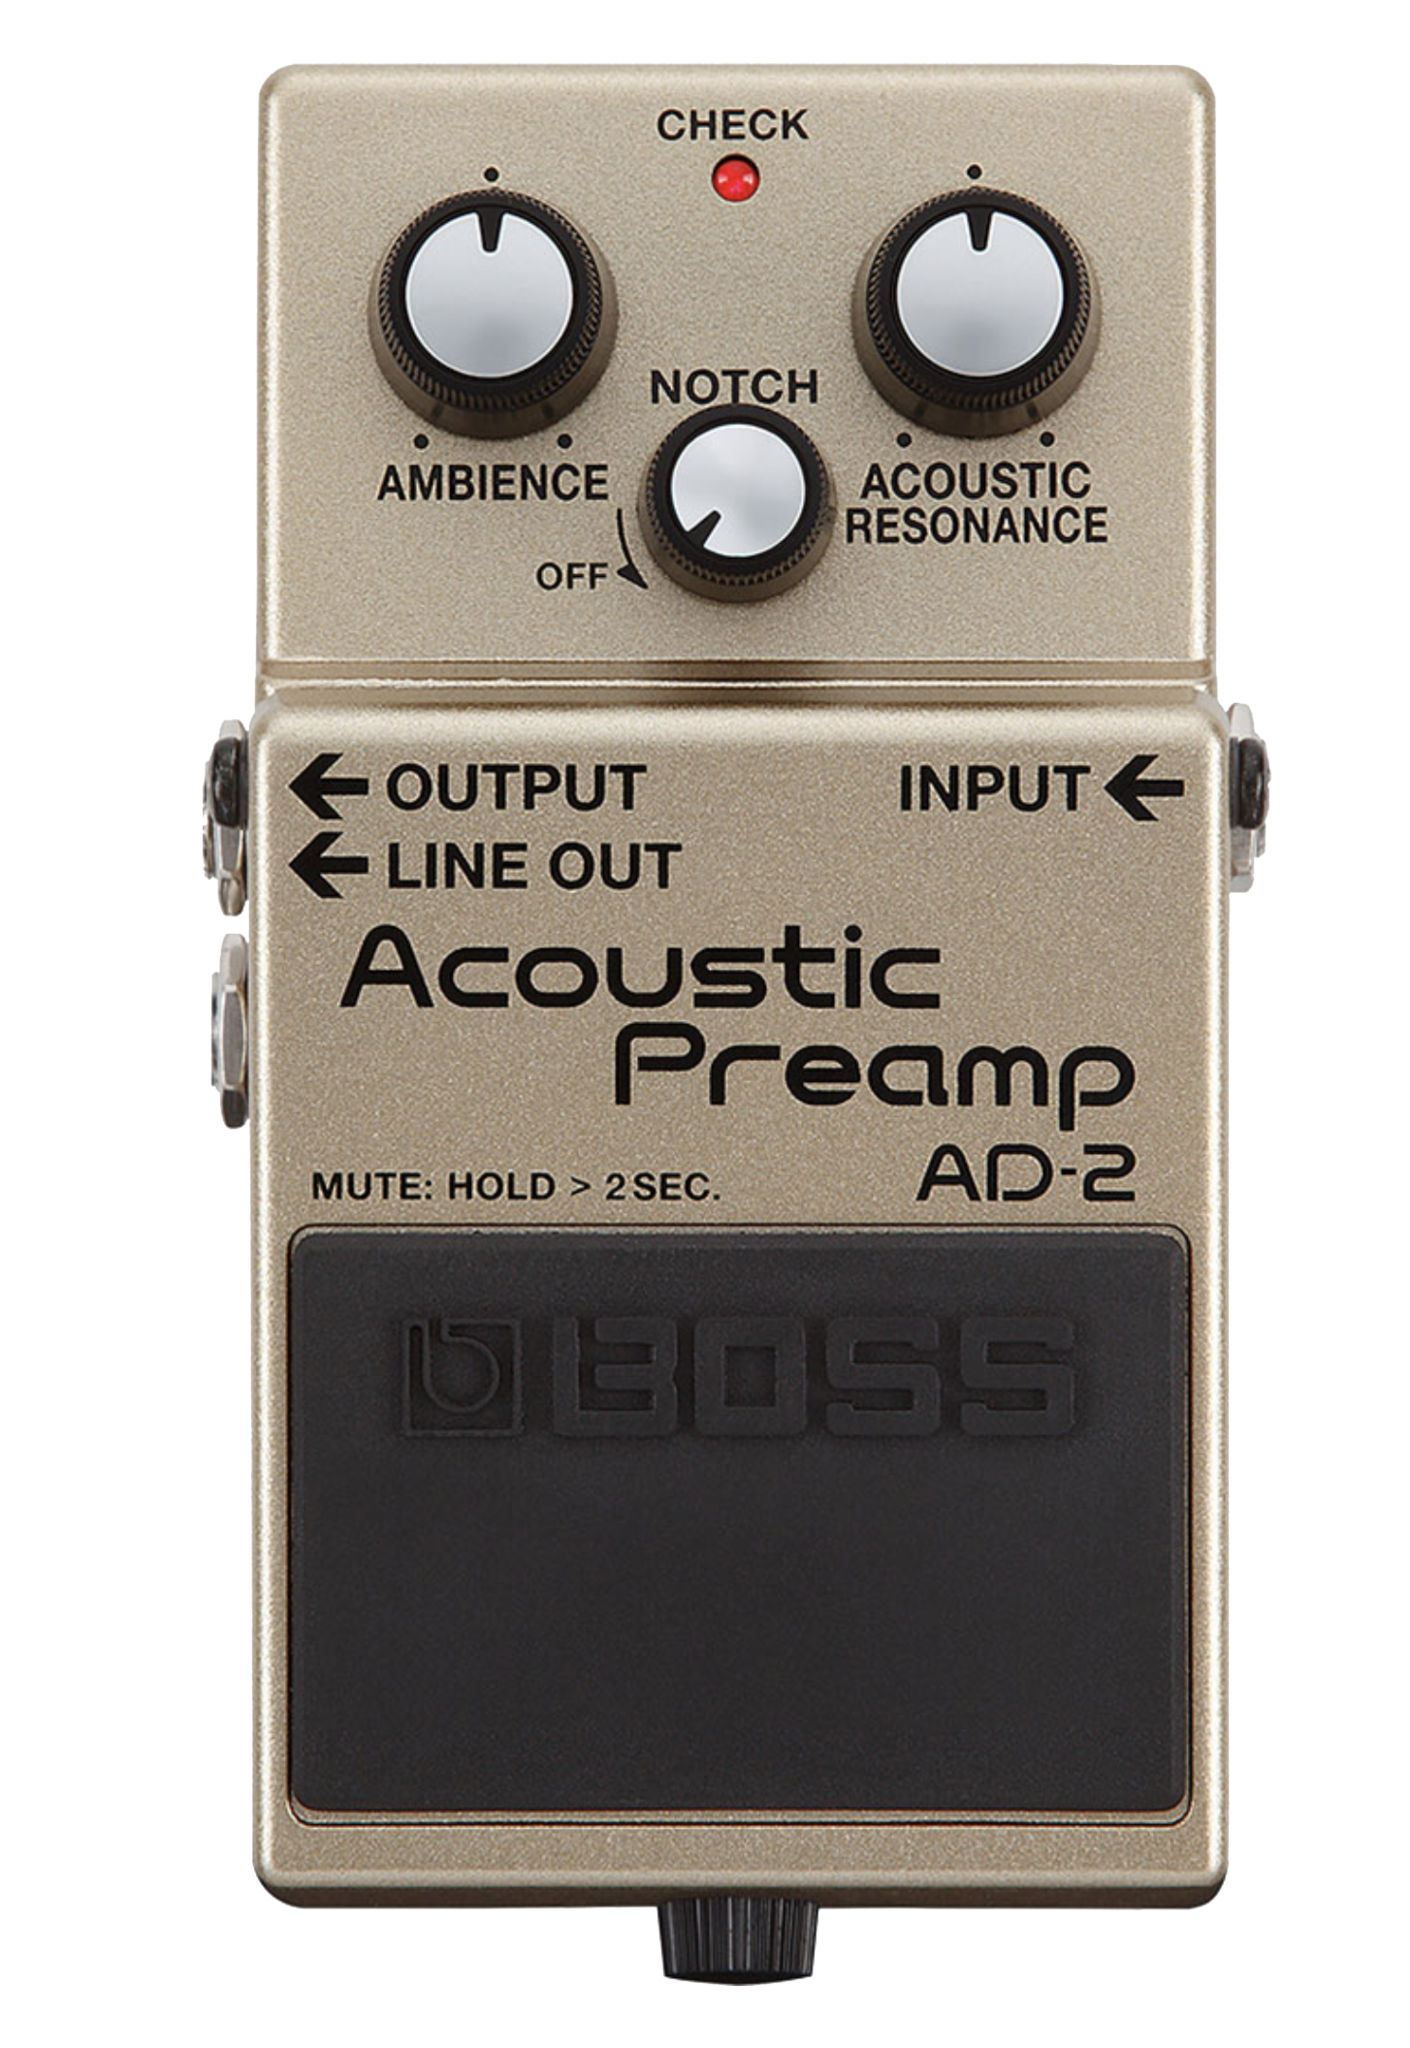 Top down of Boss AD-2 Acoustic Preamp.